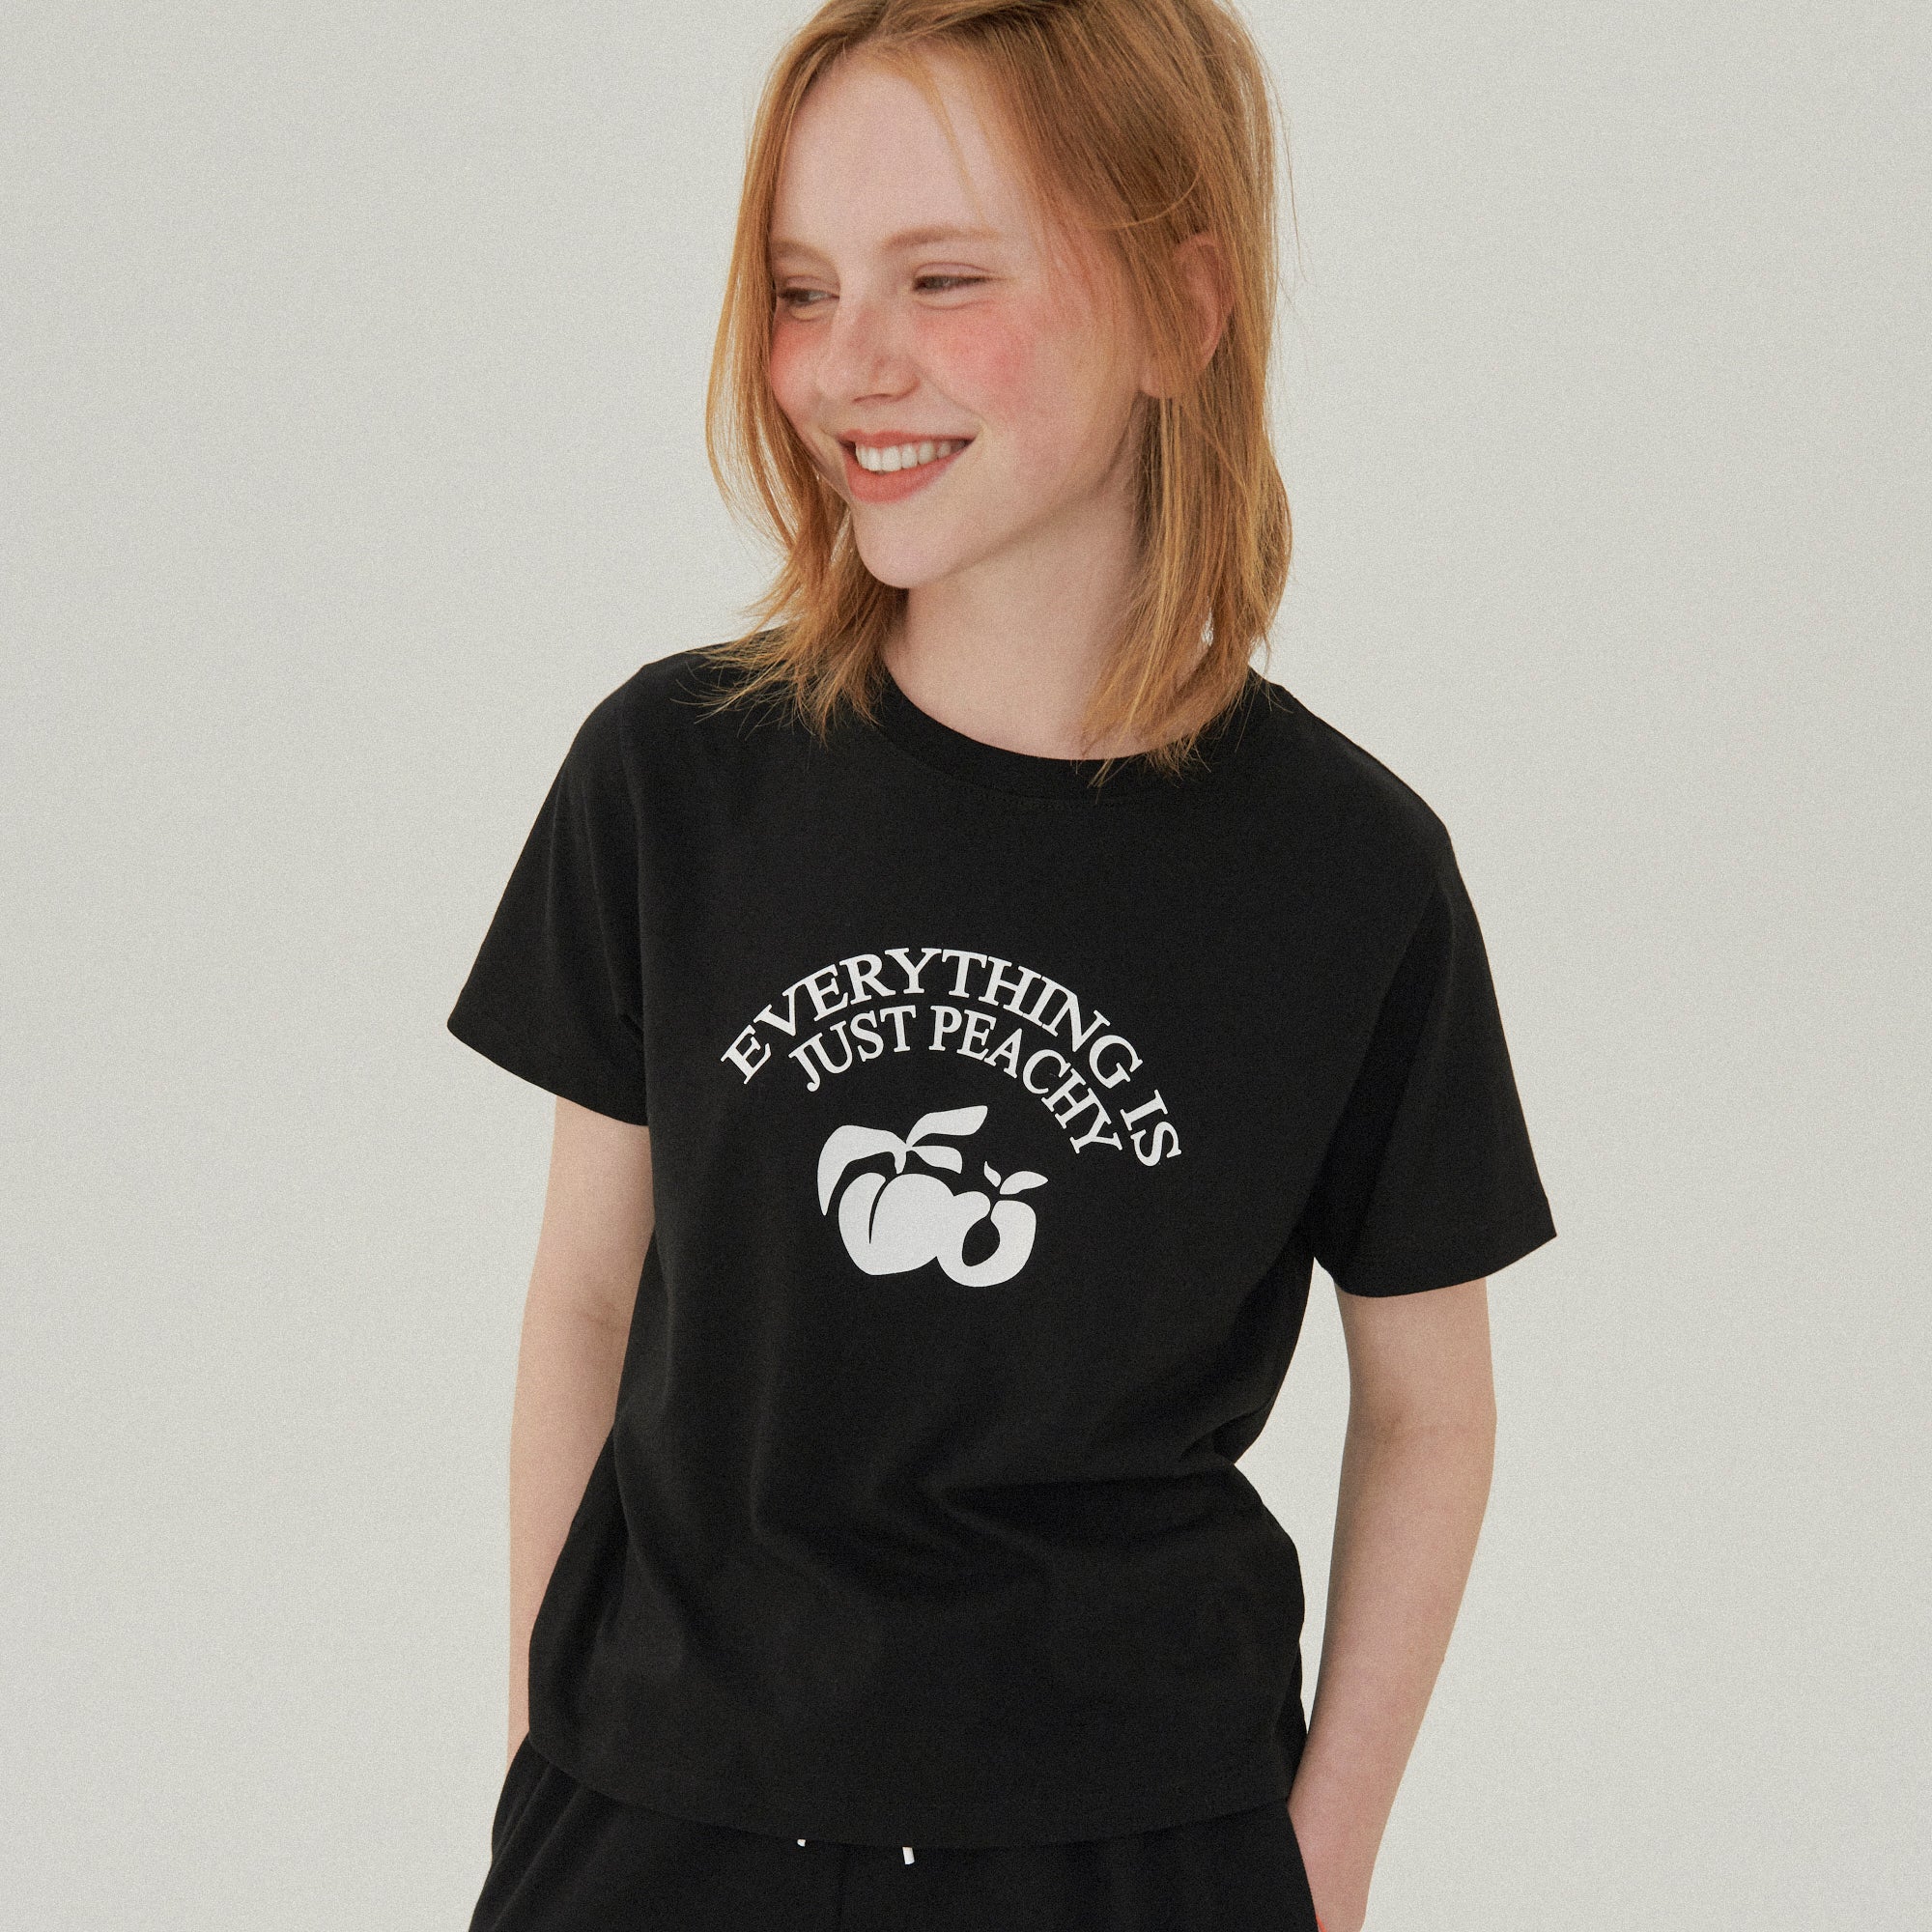 EVERYTHING IS GRAPHIC T-SHIRT_BLACK